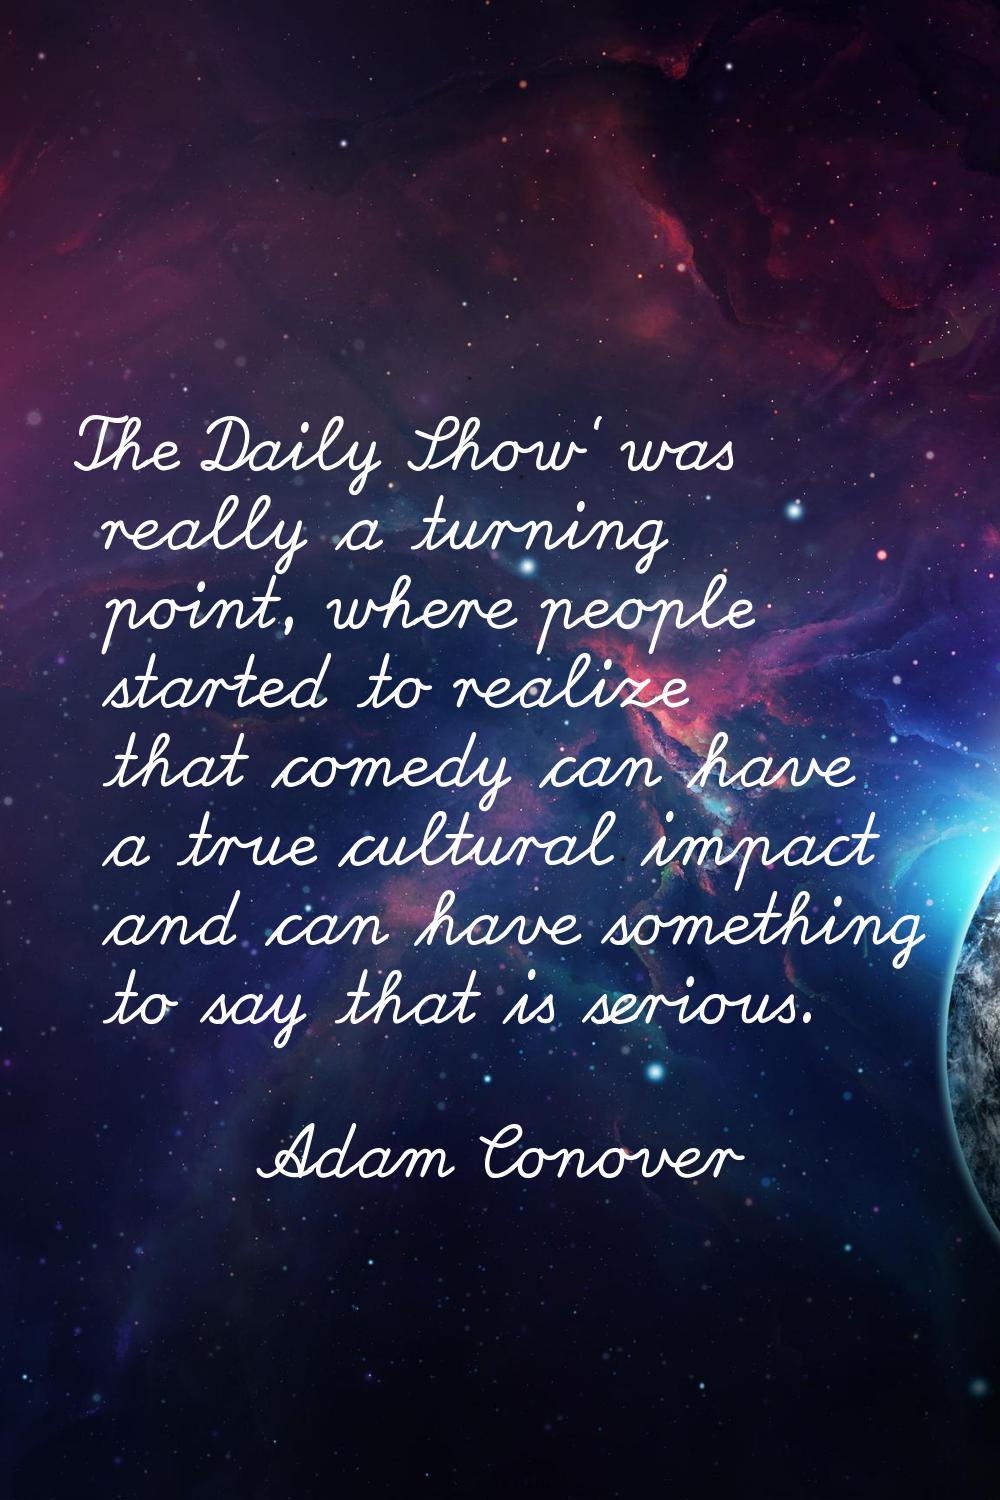 The Daily Show' was really a turning point, where people started to realize that comedy can have a 